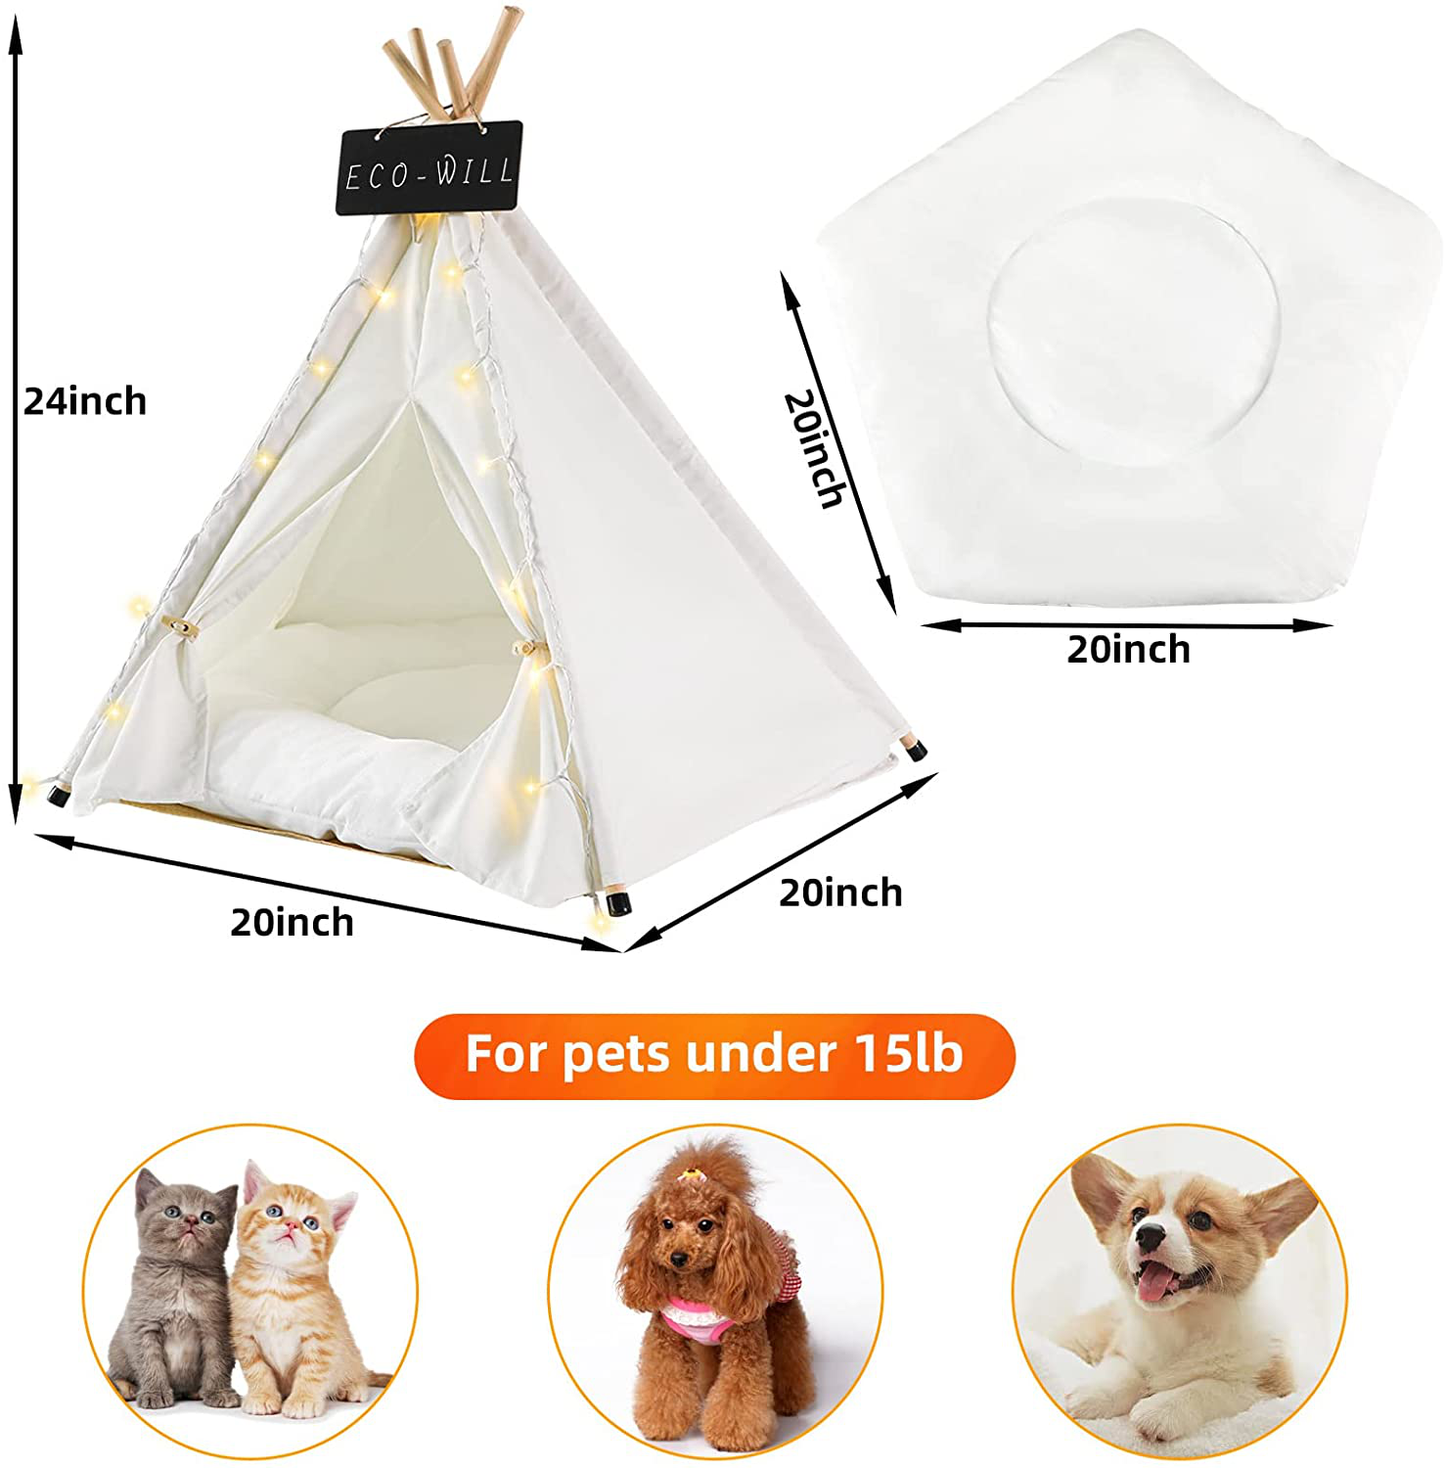 ECO-WILL Pet Teepee Pet Tent with Cushion Portable Puppy Bed for Small Dogs and Cats Folding Dogs House with LED Light String for Indoor and Outdoor,Christmas,24Inches